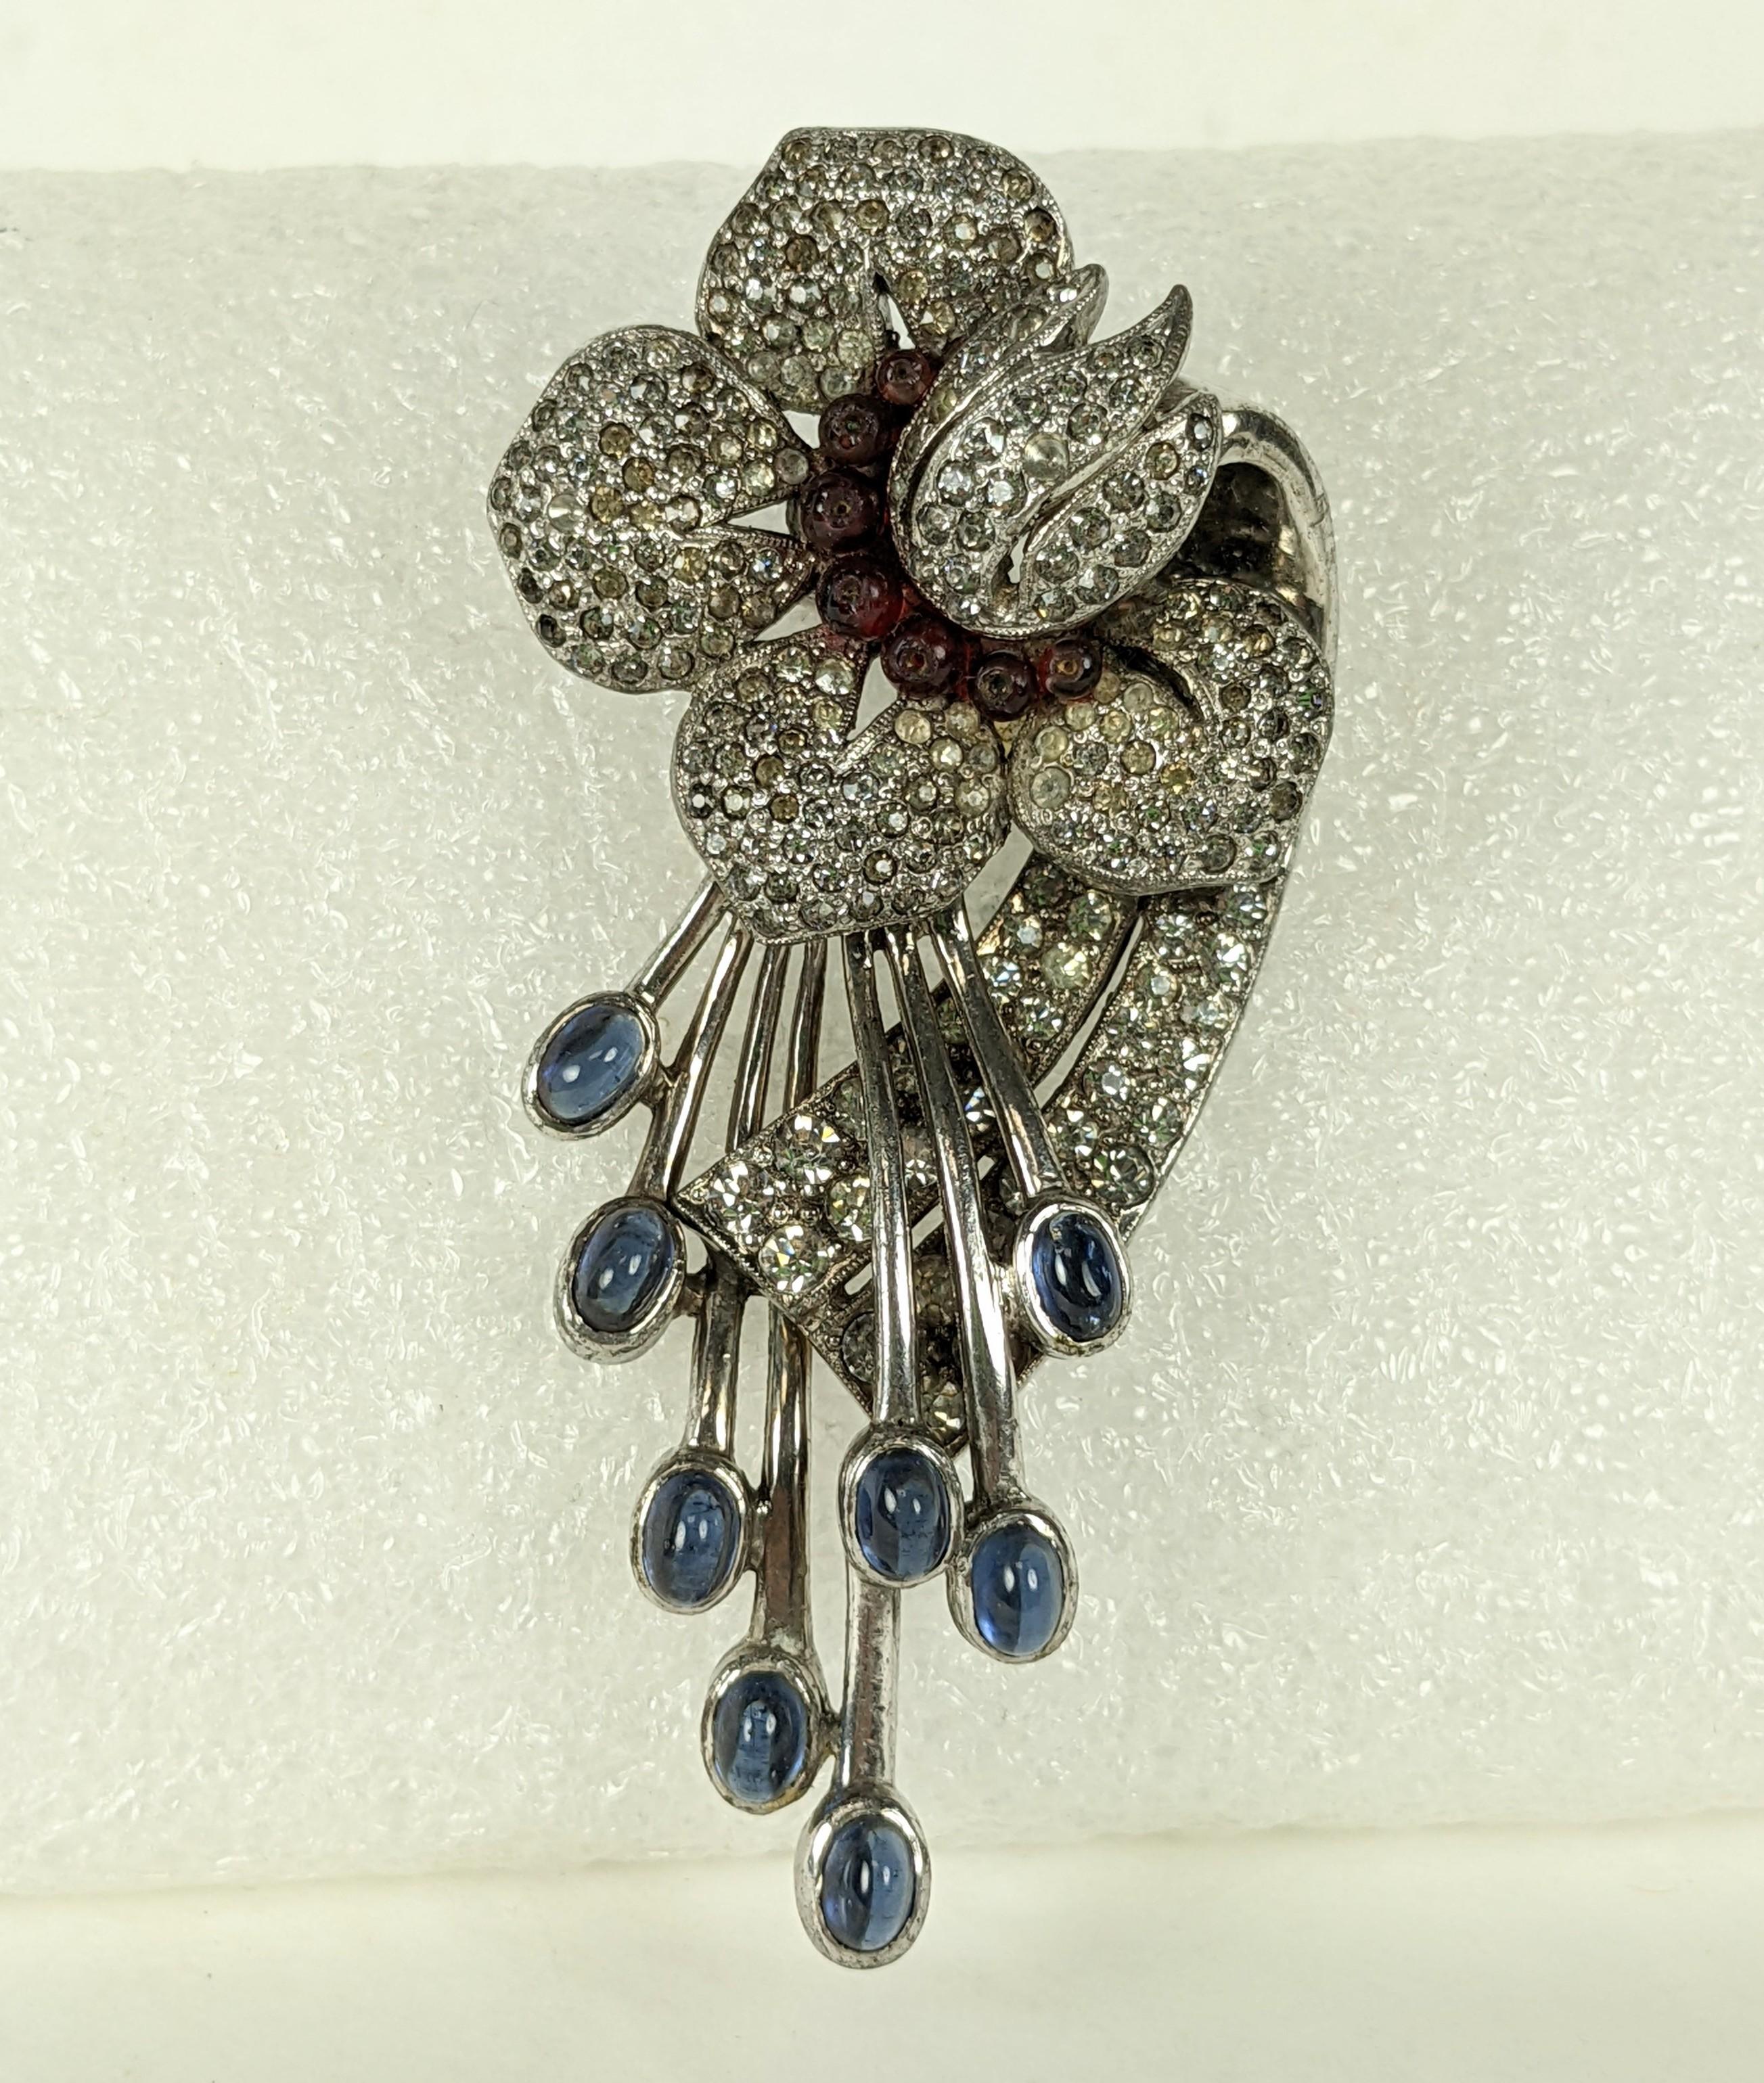 Attractive Art Deco Pave Lily Brooch of high quality from the 1930's. Designed as a spitting lily with cabs of faux sapphires from ruby bead center. Fine pave work throughout flower head and spray.
1930's USA likely made by DeRosa.  3.25